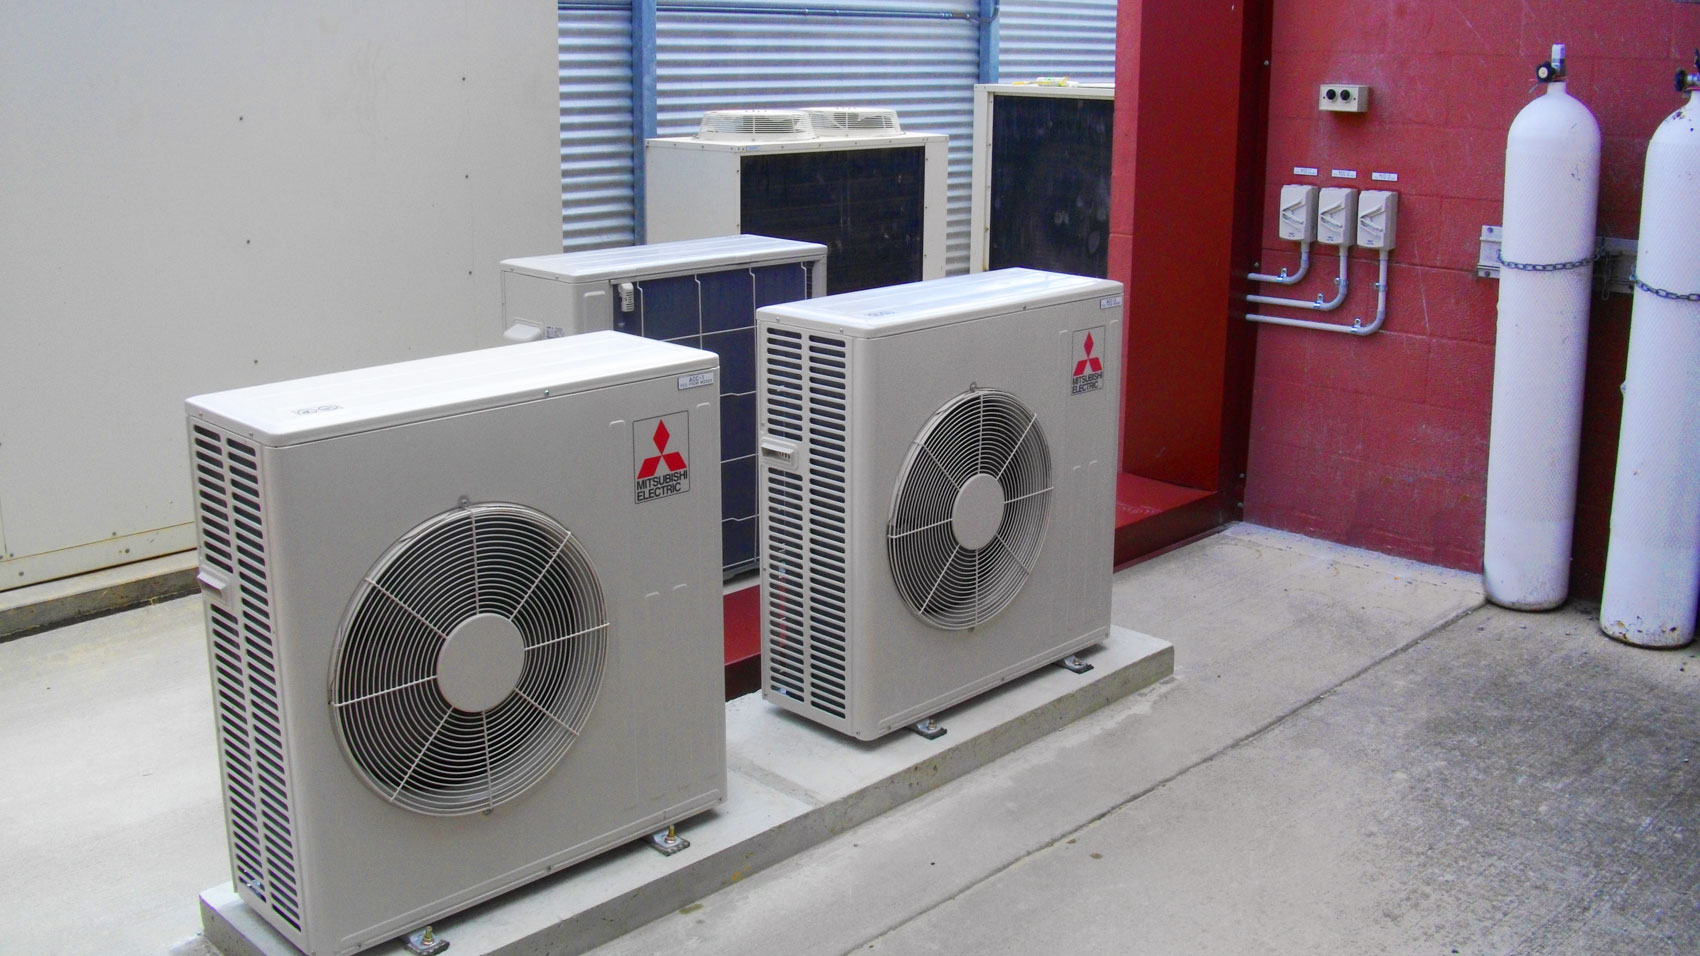 air conditioning units sitting side by side